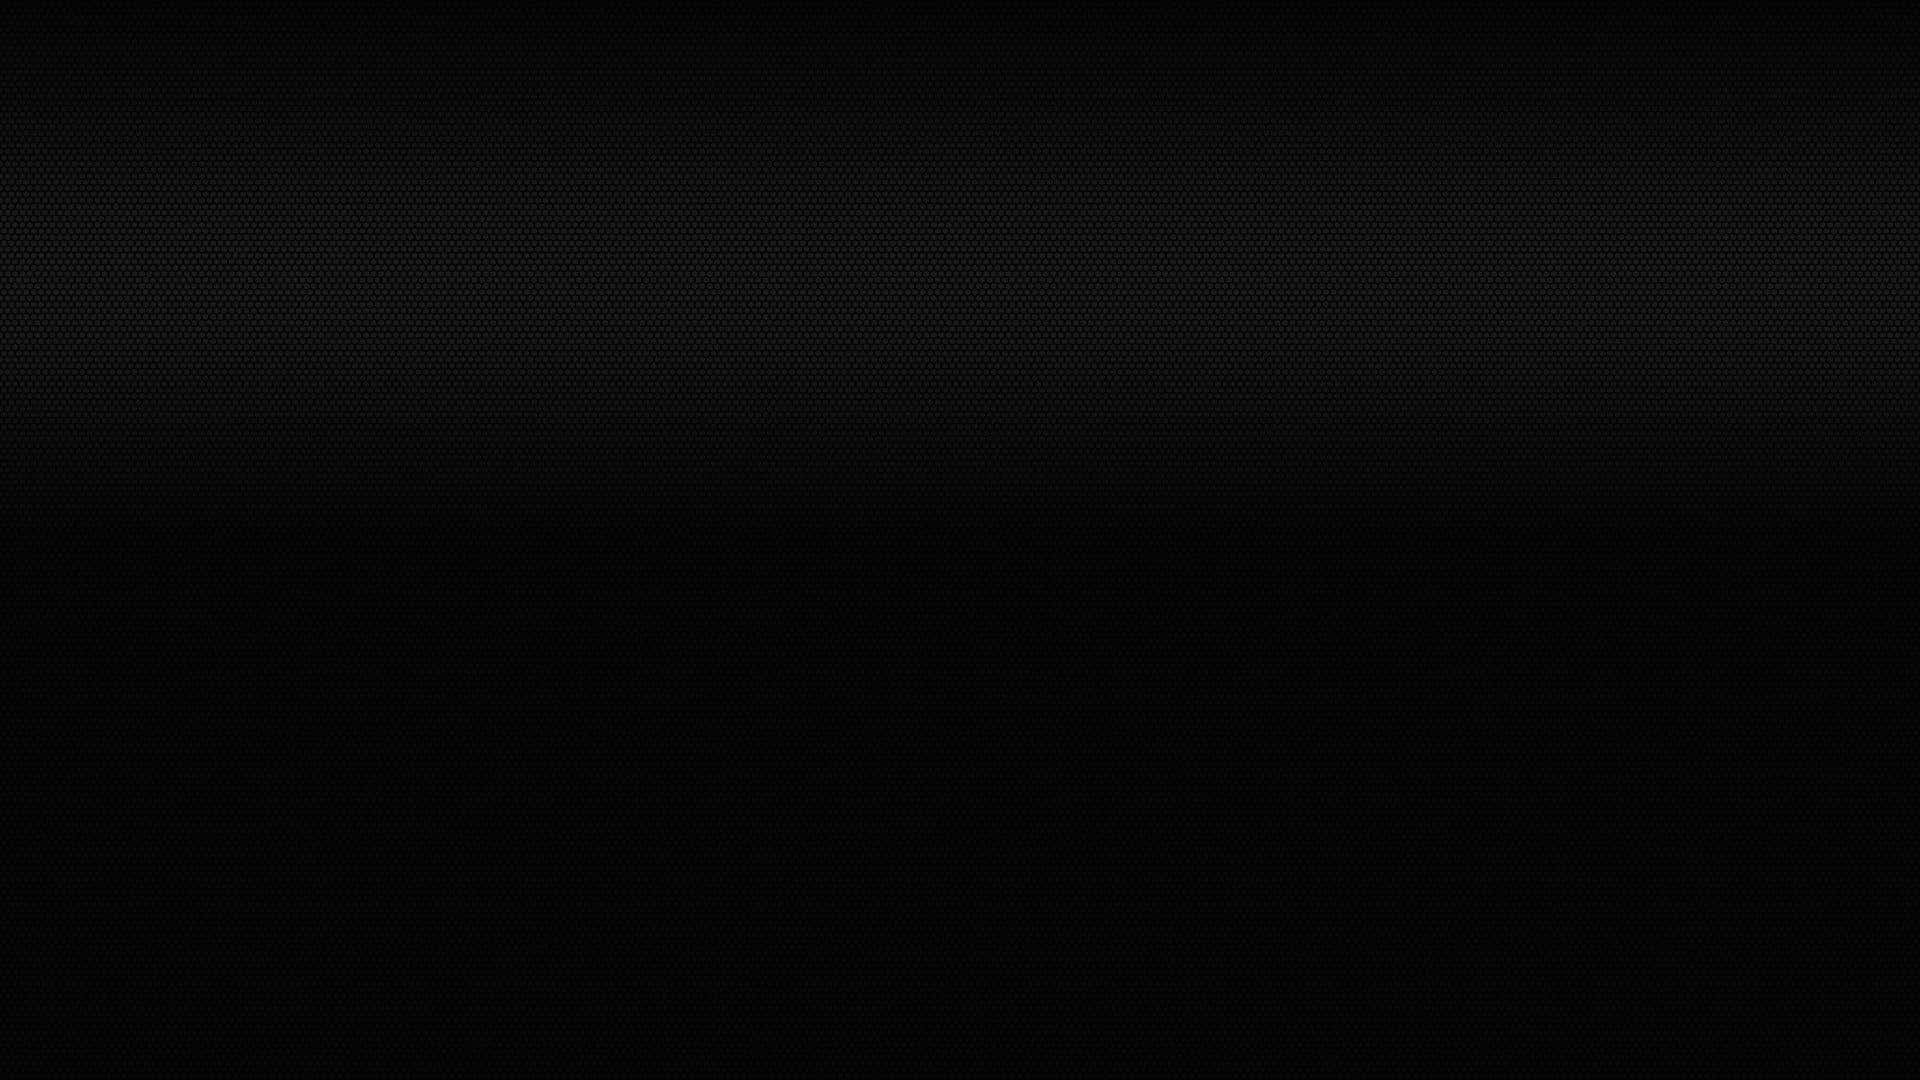 Download A Minimalistic Black Solid Background | Wallpapers.com